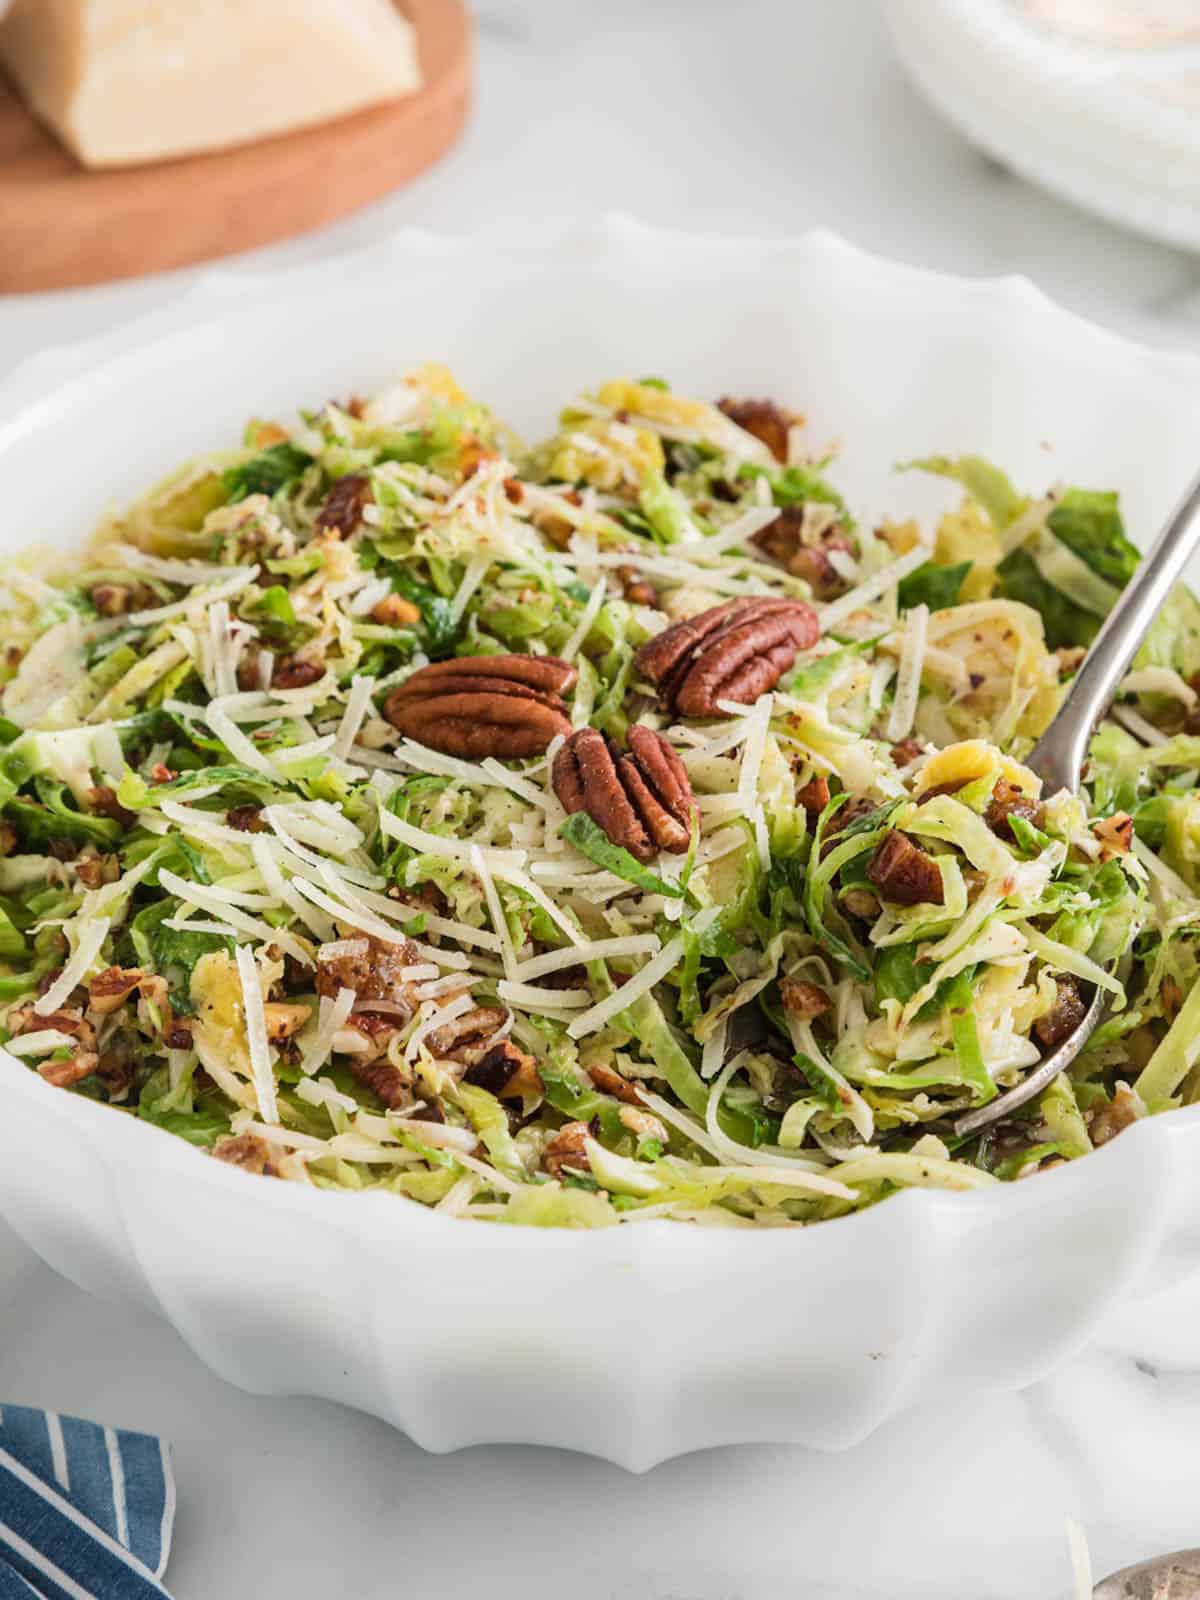 Shaved Brussels sprouts salad with parmesan and pecans in white bowl with spoon.